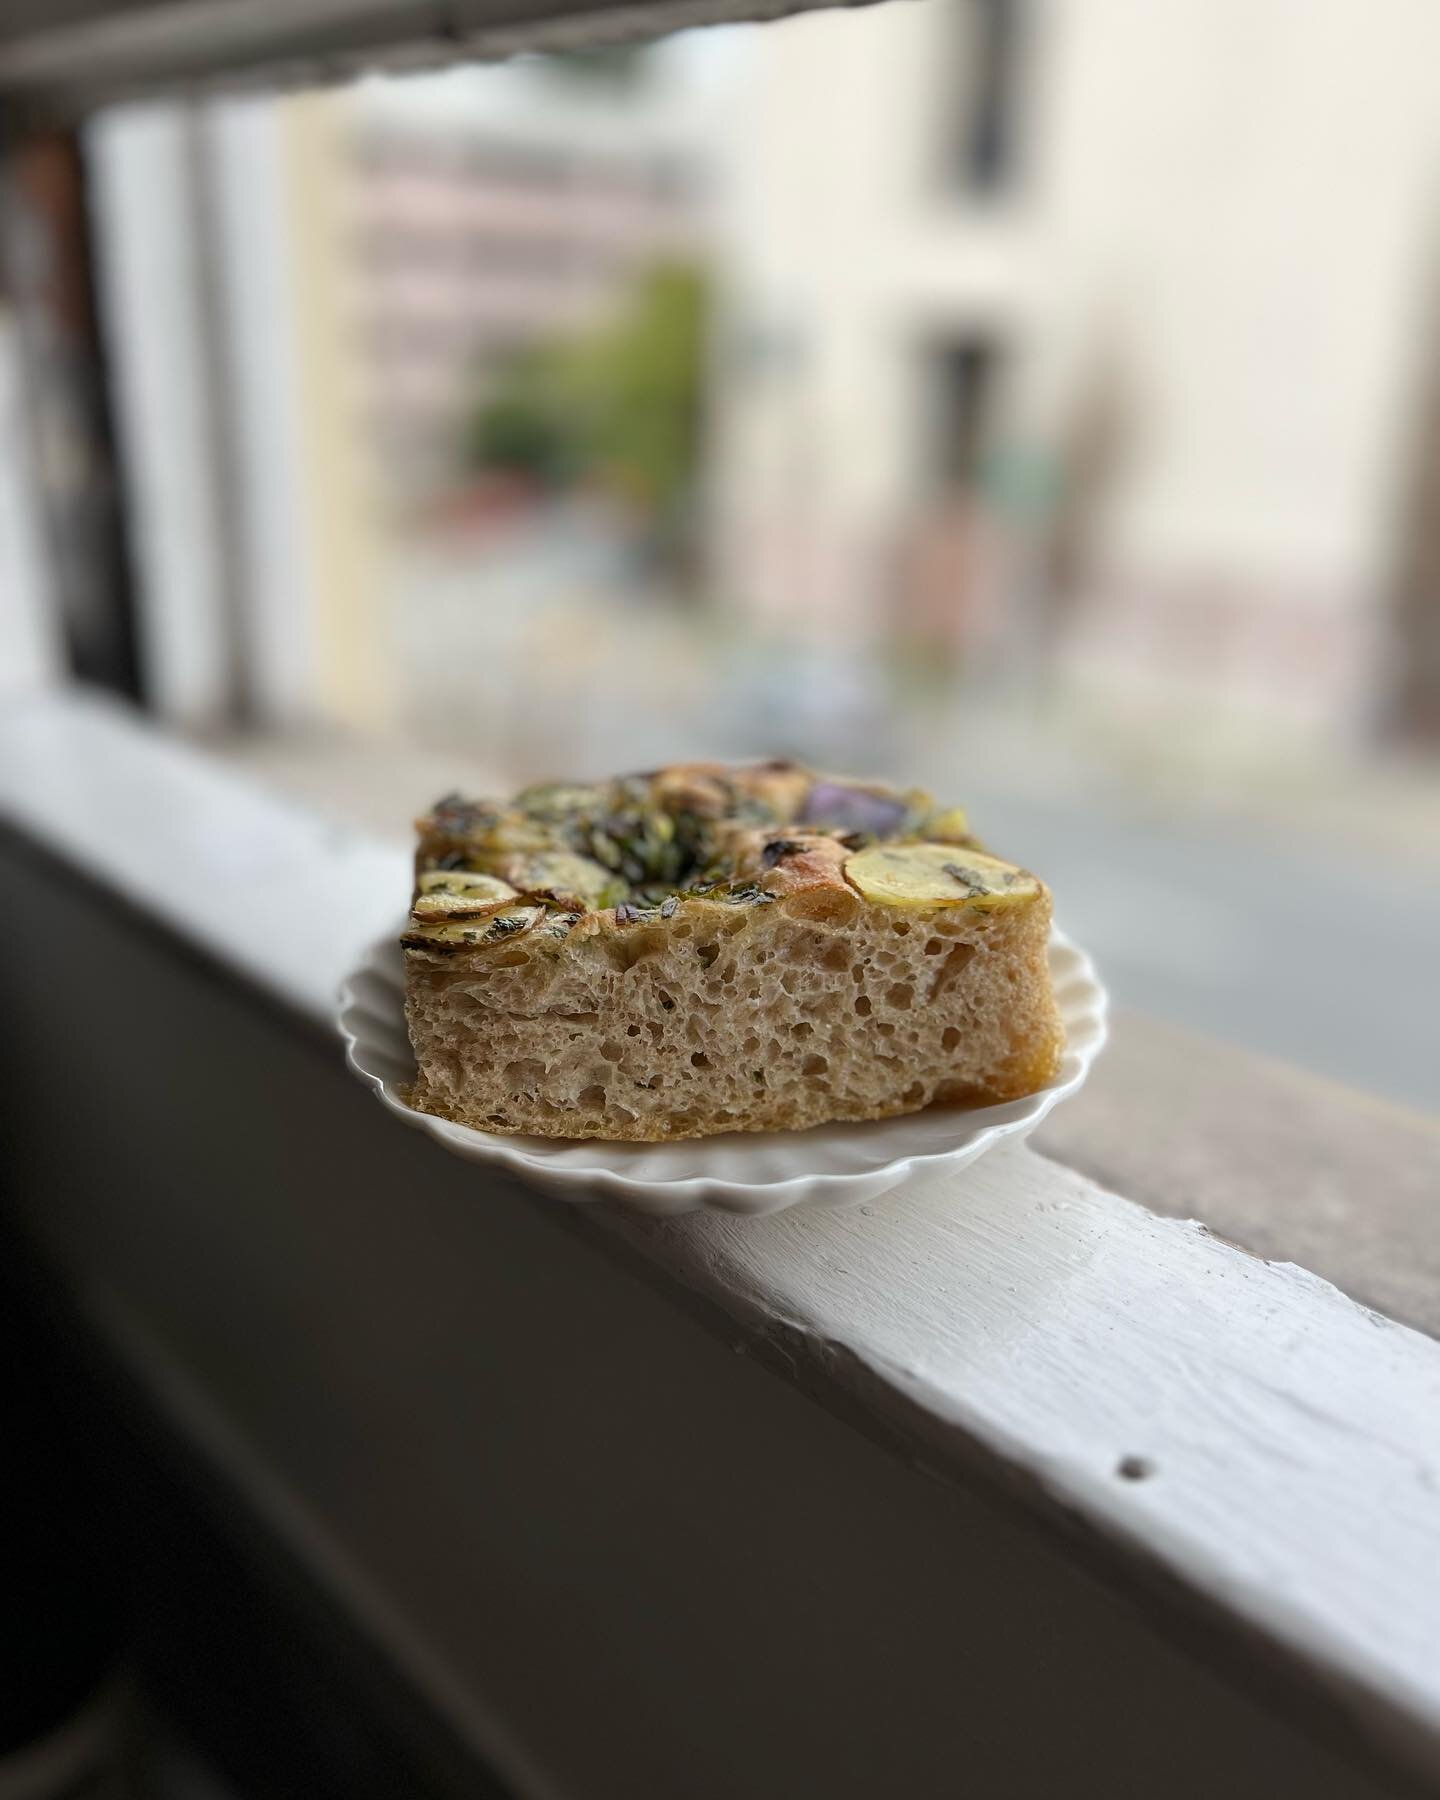 Soft red &Oslash;land doing what it does best! In the hands of an appreciative (and talented) baker, it can go far. 

Baby leeks and shallots from @bleubellefarm , fingerling potatoes from @zuckermans_farm , nestled onto focaccia made from 30% &Oslas